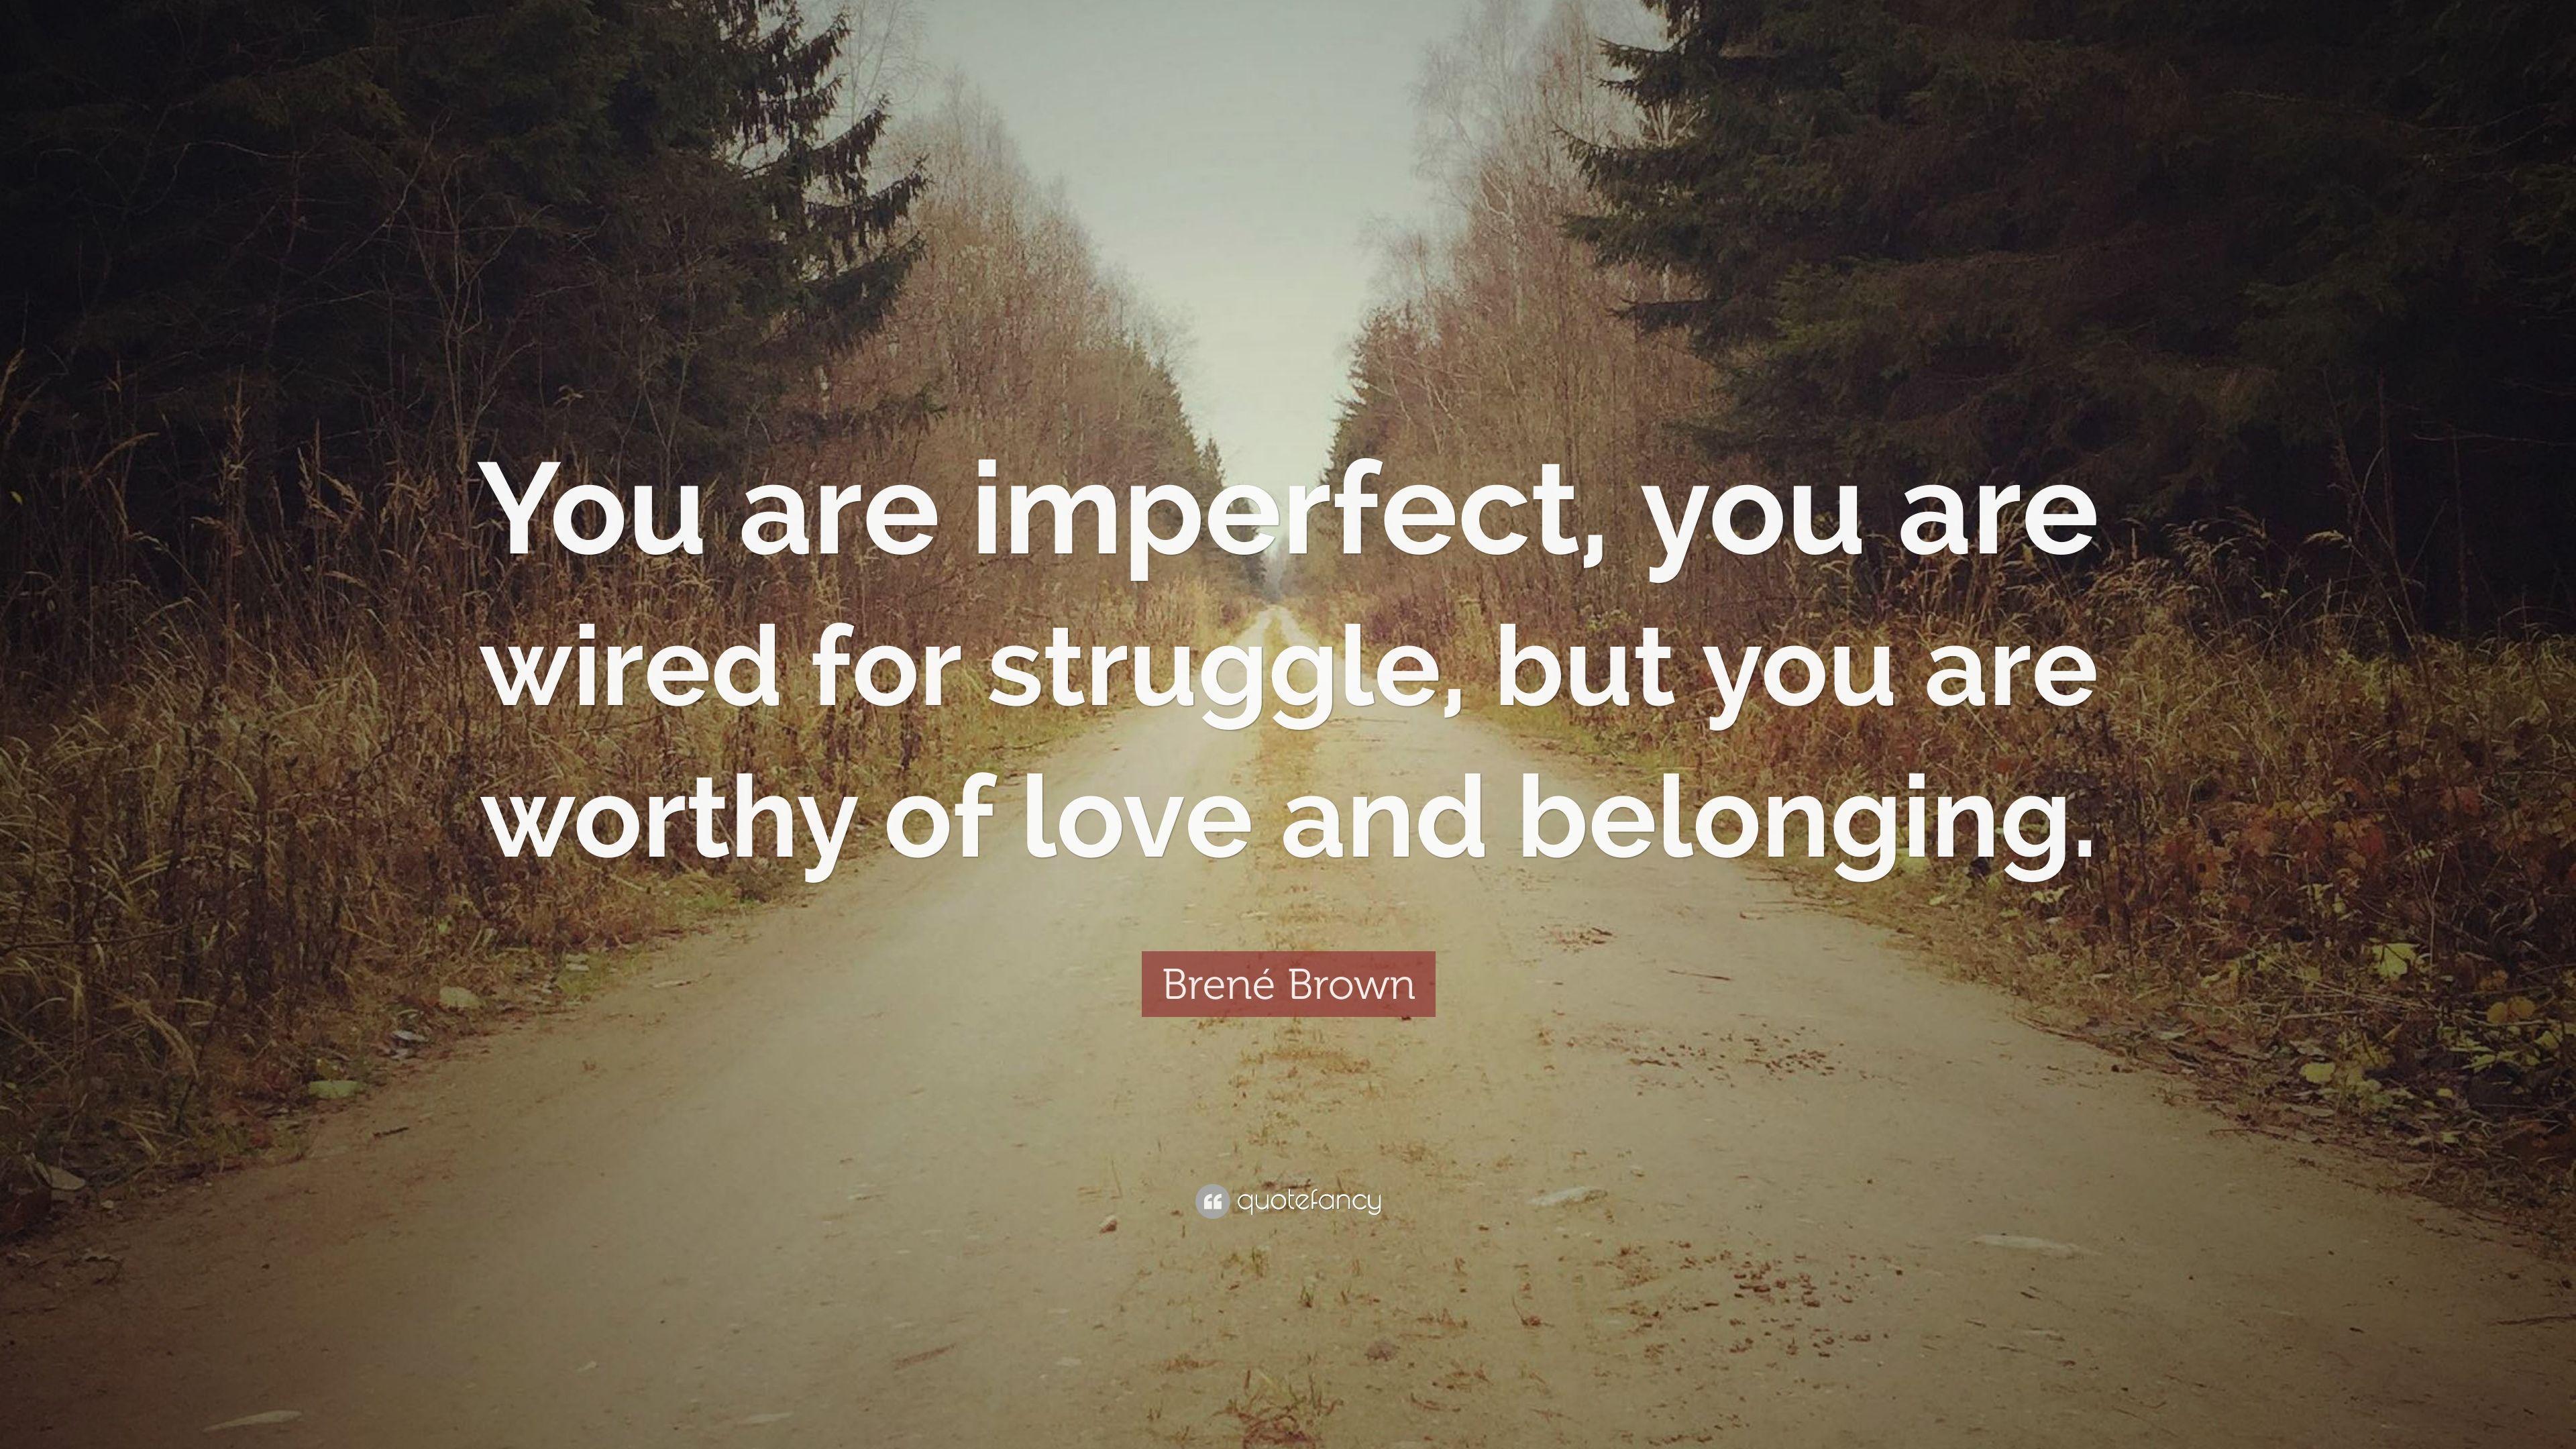 Brené Brown Quote: “You are imperfect, you are wired for struggle